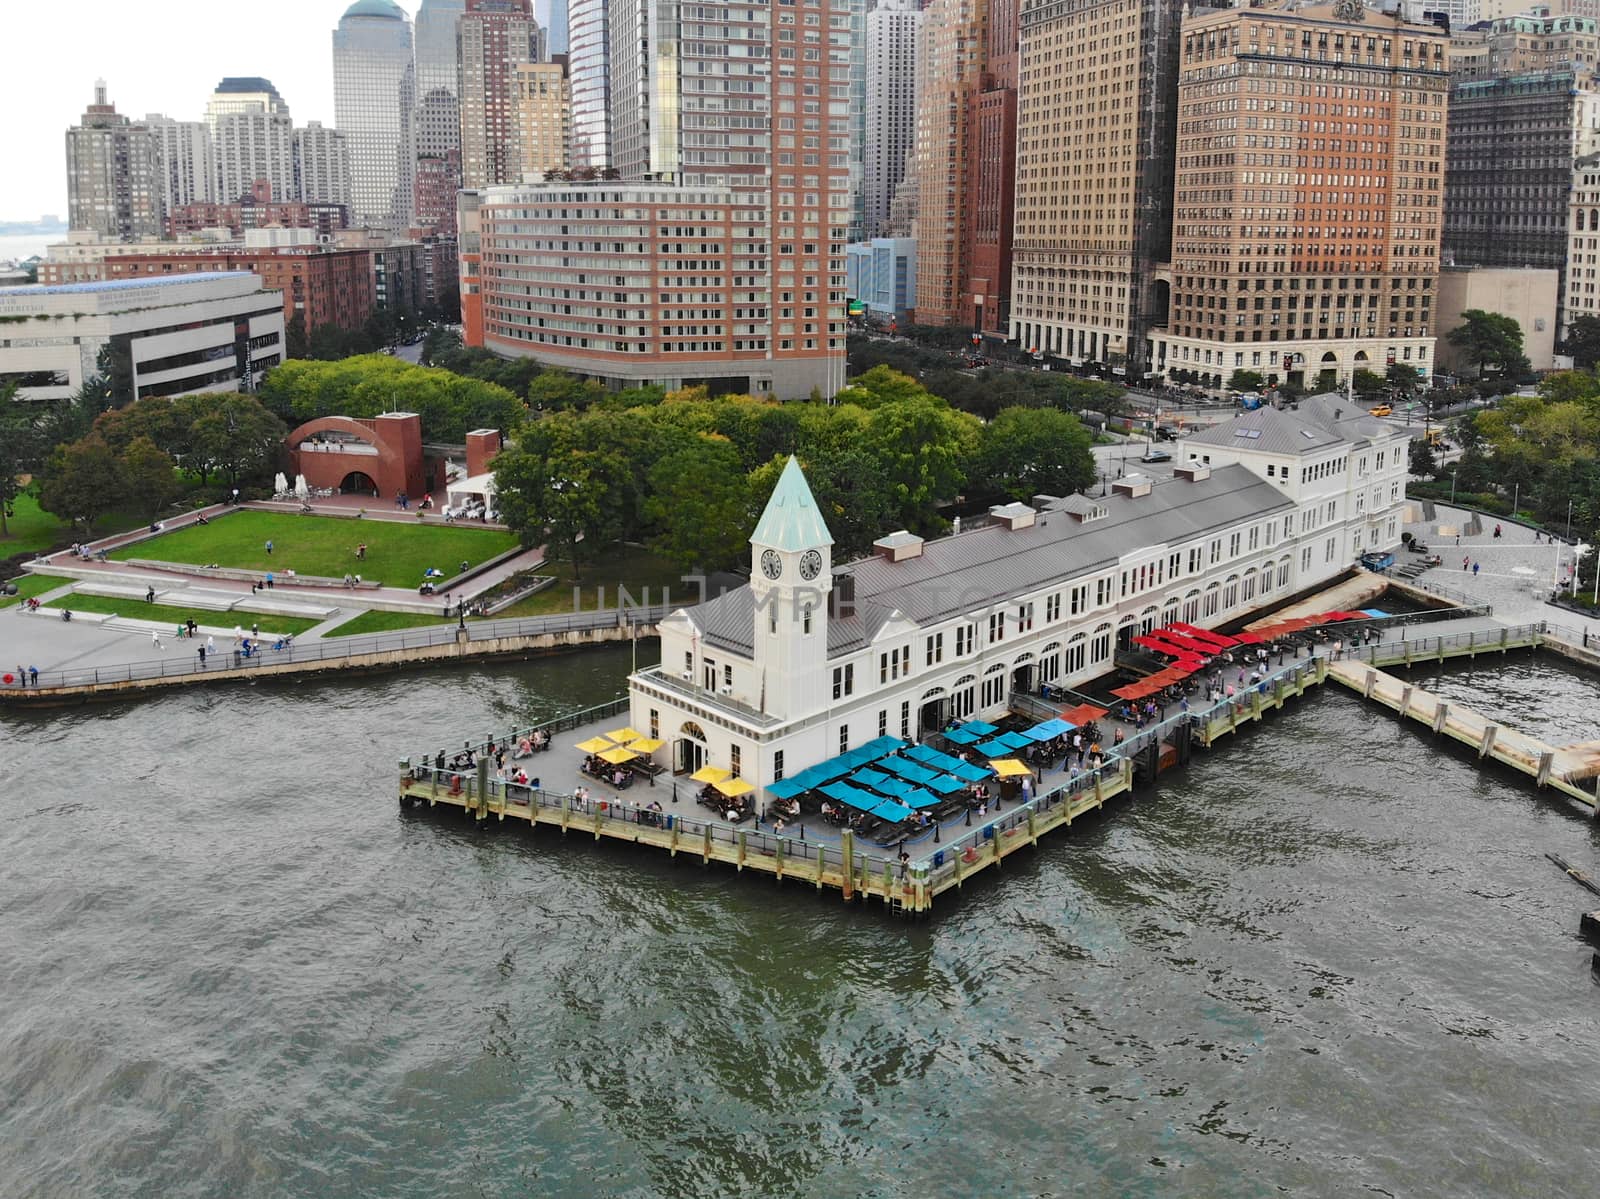 Aerial view of Battery Park pier A leading to Liberty Island, people can be seen waiting in line for boarding as well as looking at Liberty Island located opposite to the docks. October, 22nd, 2019